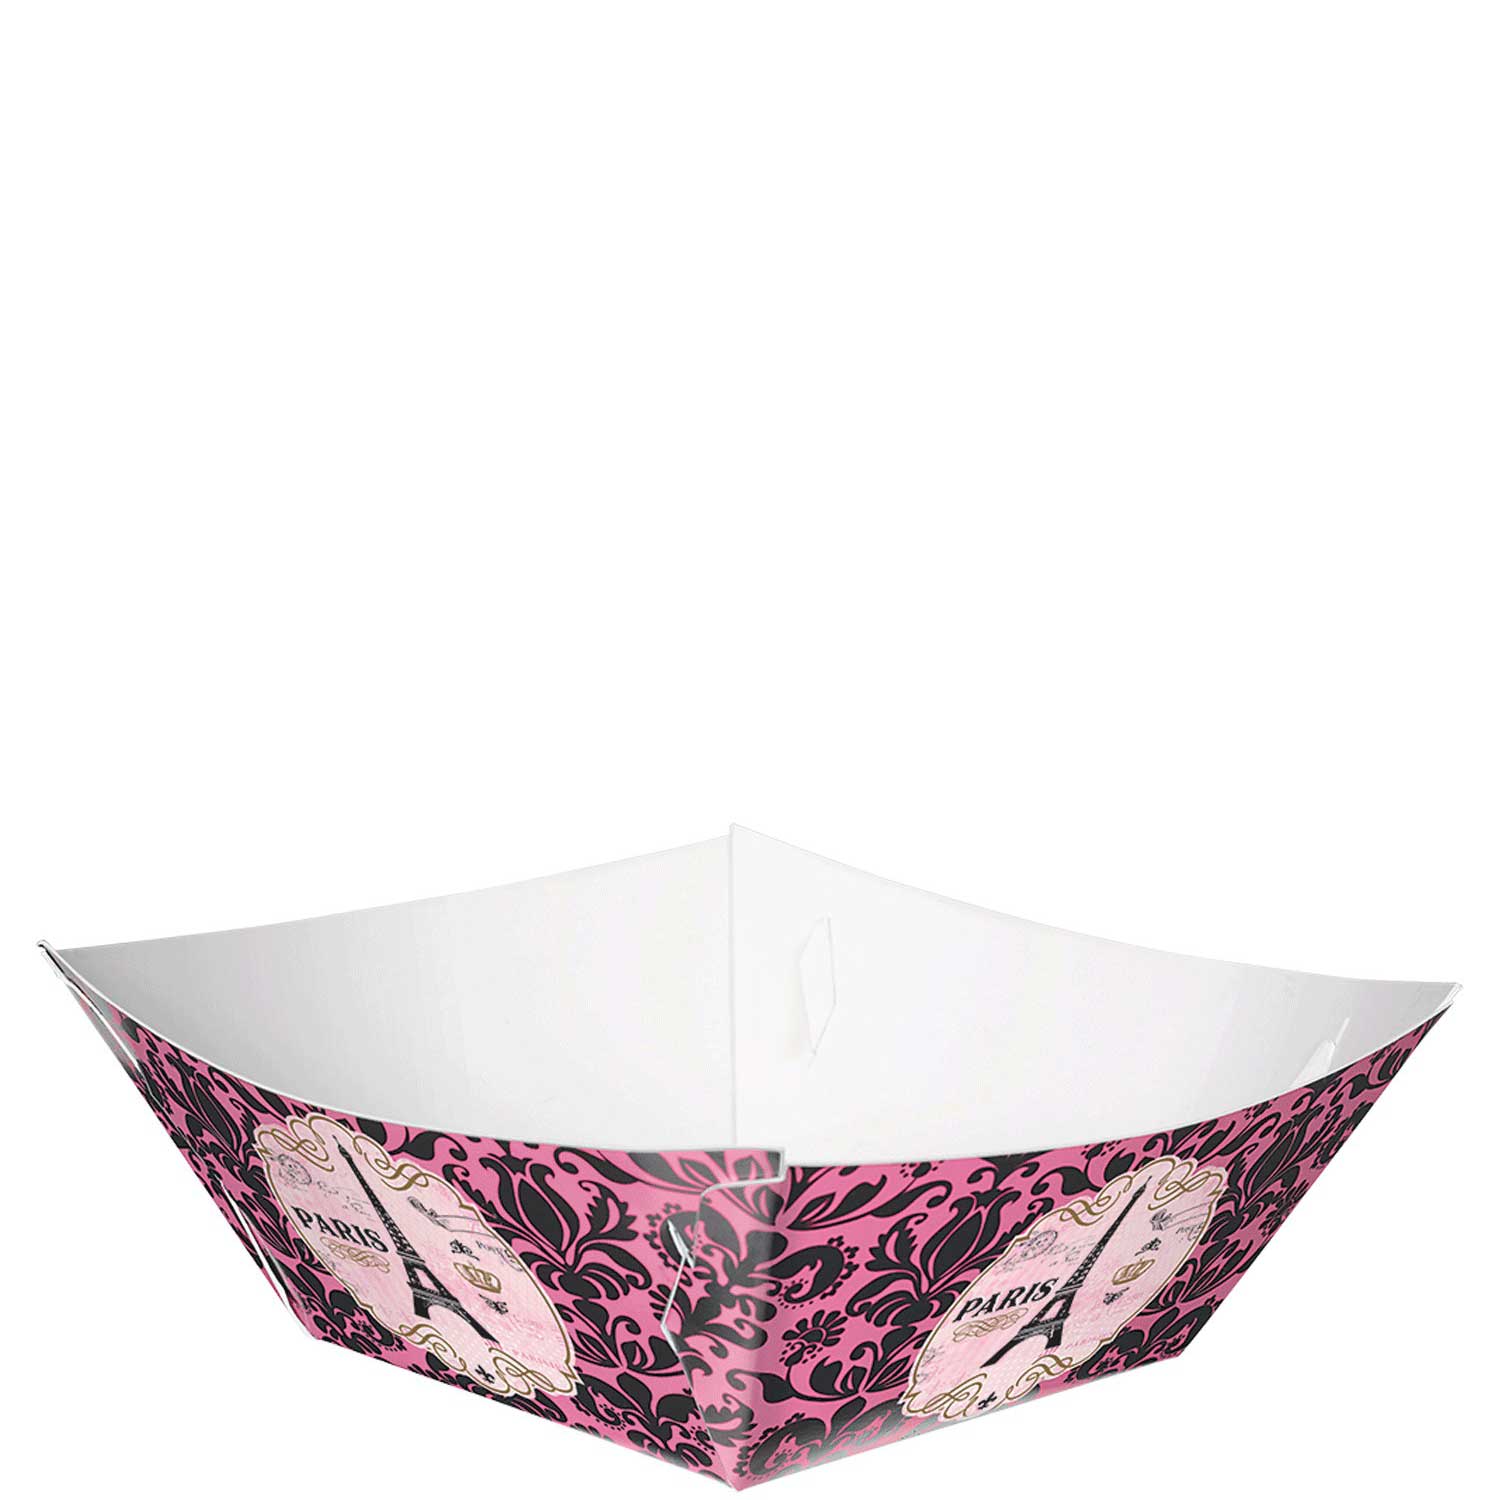 A Day In Paris Paper Snack Bowls 3pcs Candy Buffet - Party Centre